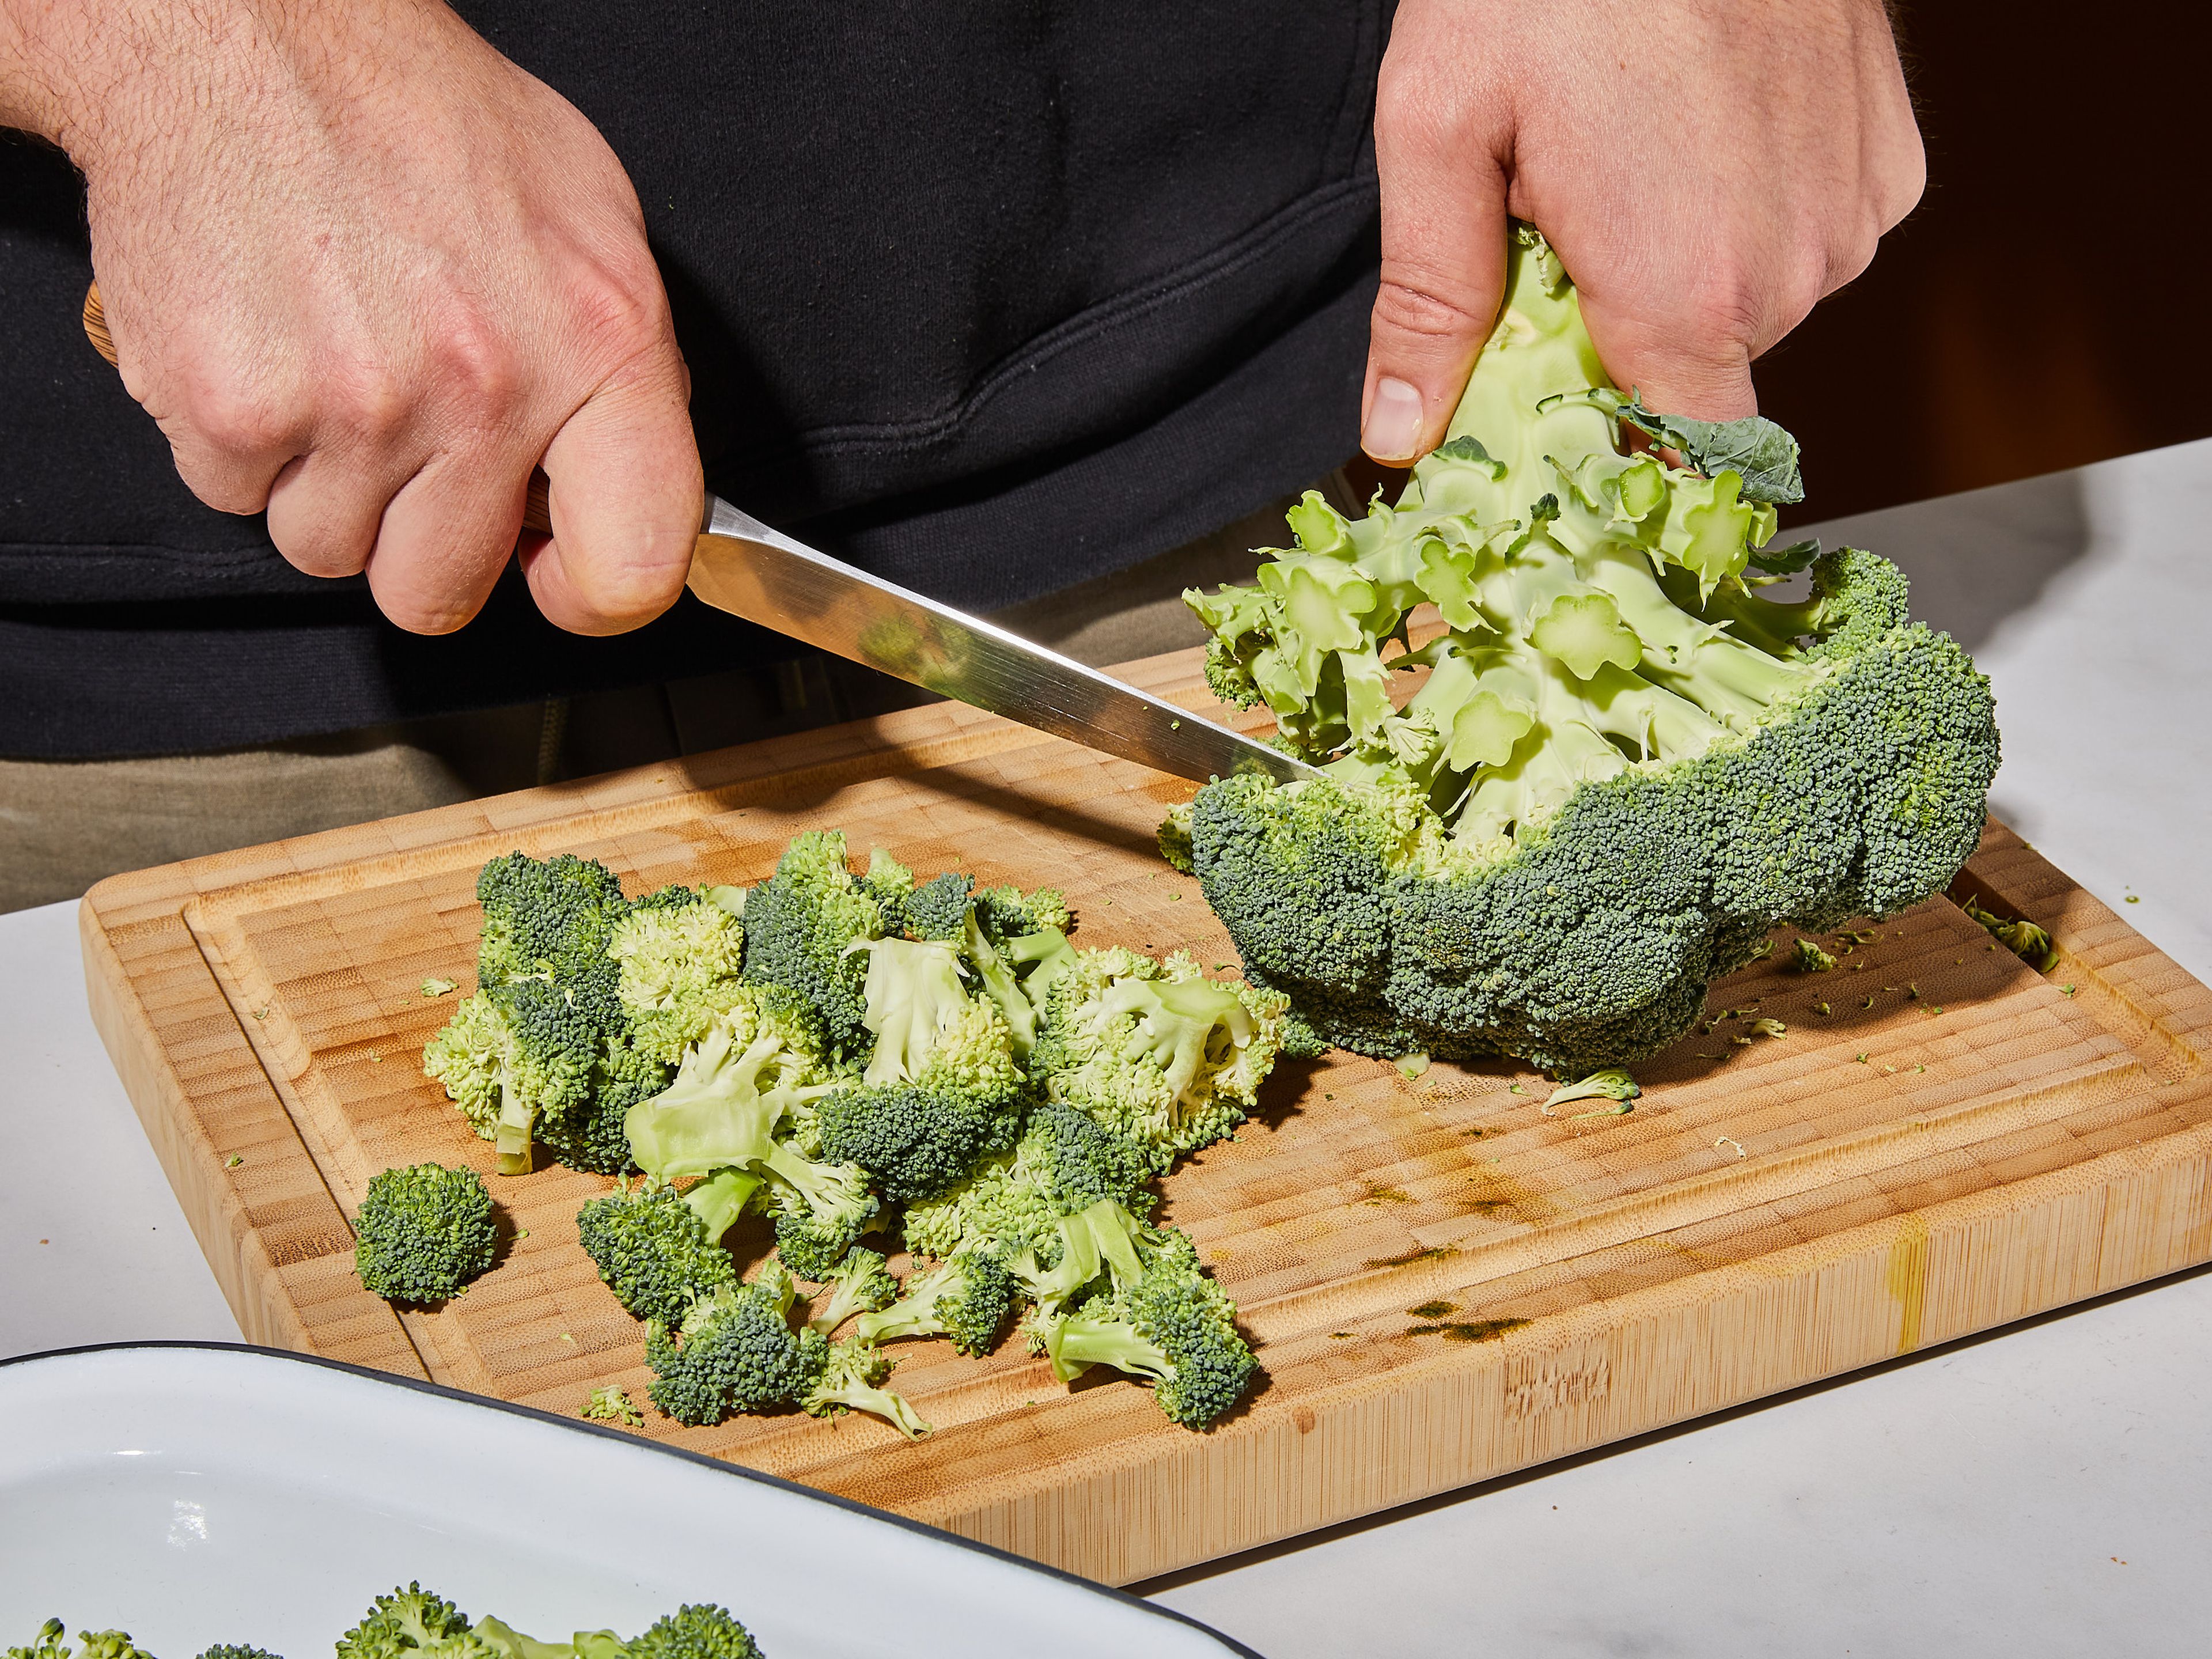 Preheat the oven to 190°C/374°F. Cut broccoli into medium-sized florets. Dice the onions and garlic.